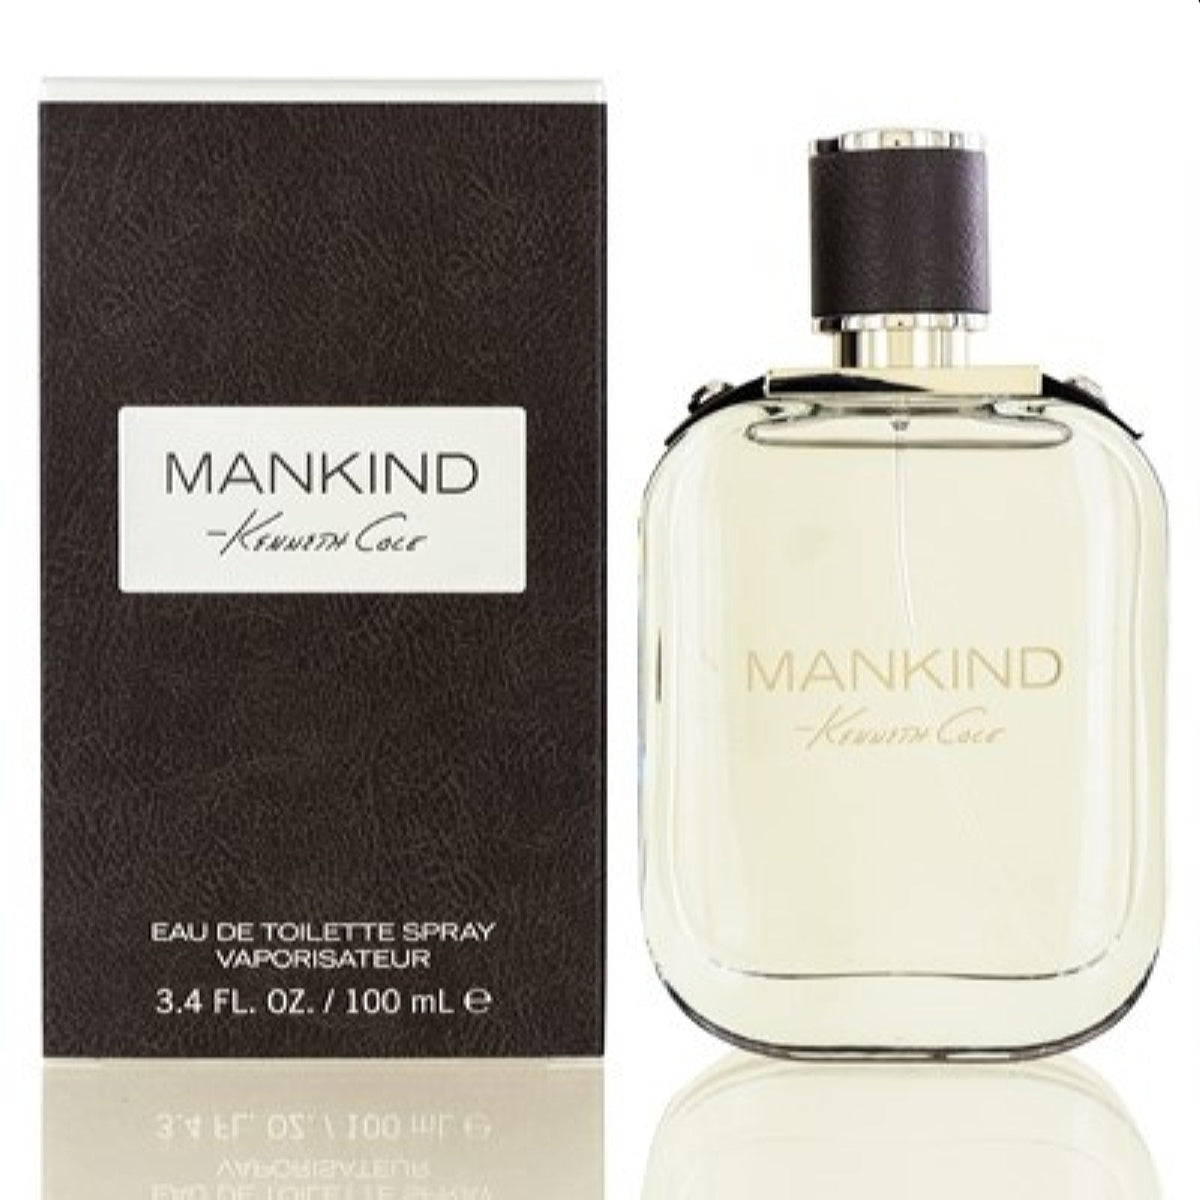 Kenneth Cole Mankind Kenneth Cole Edt Spray 3.4 Oz For Men 248656677